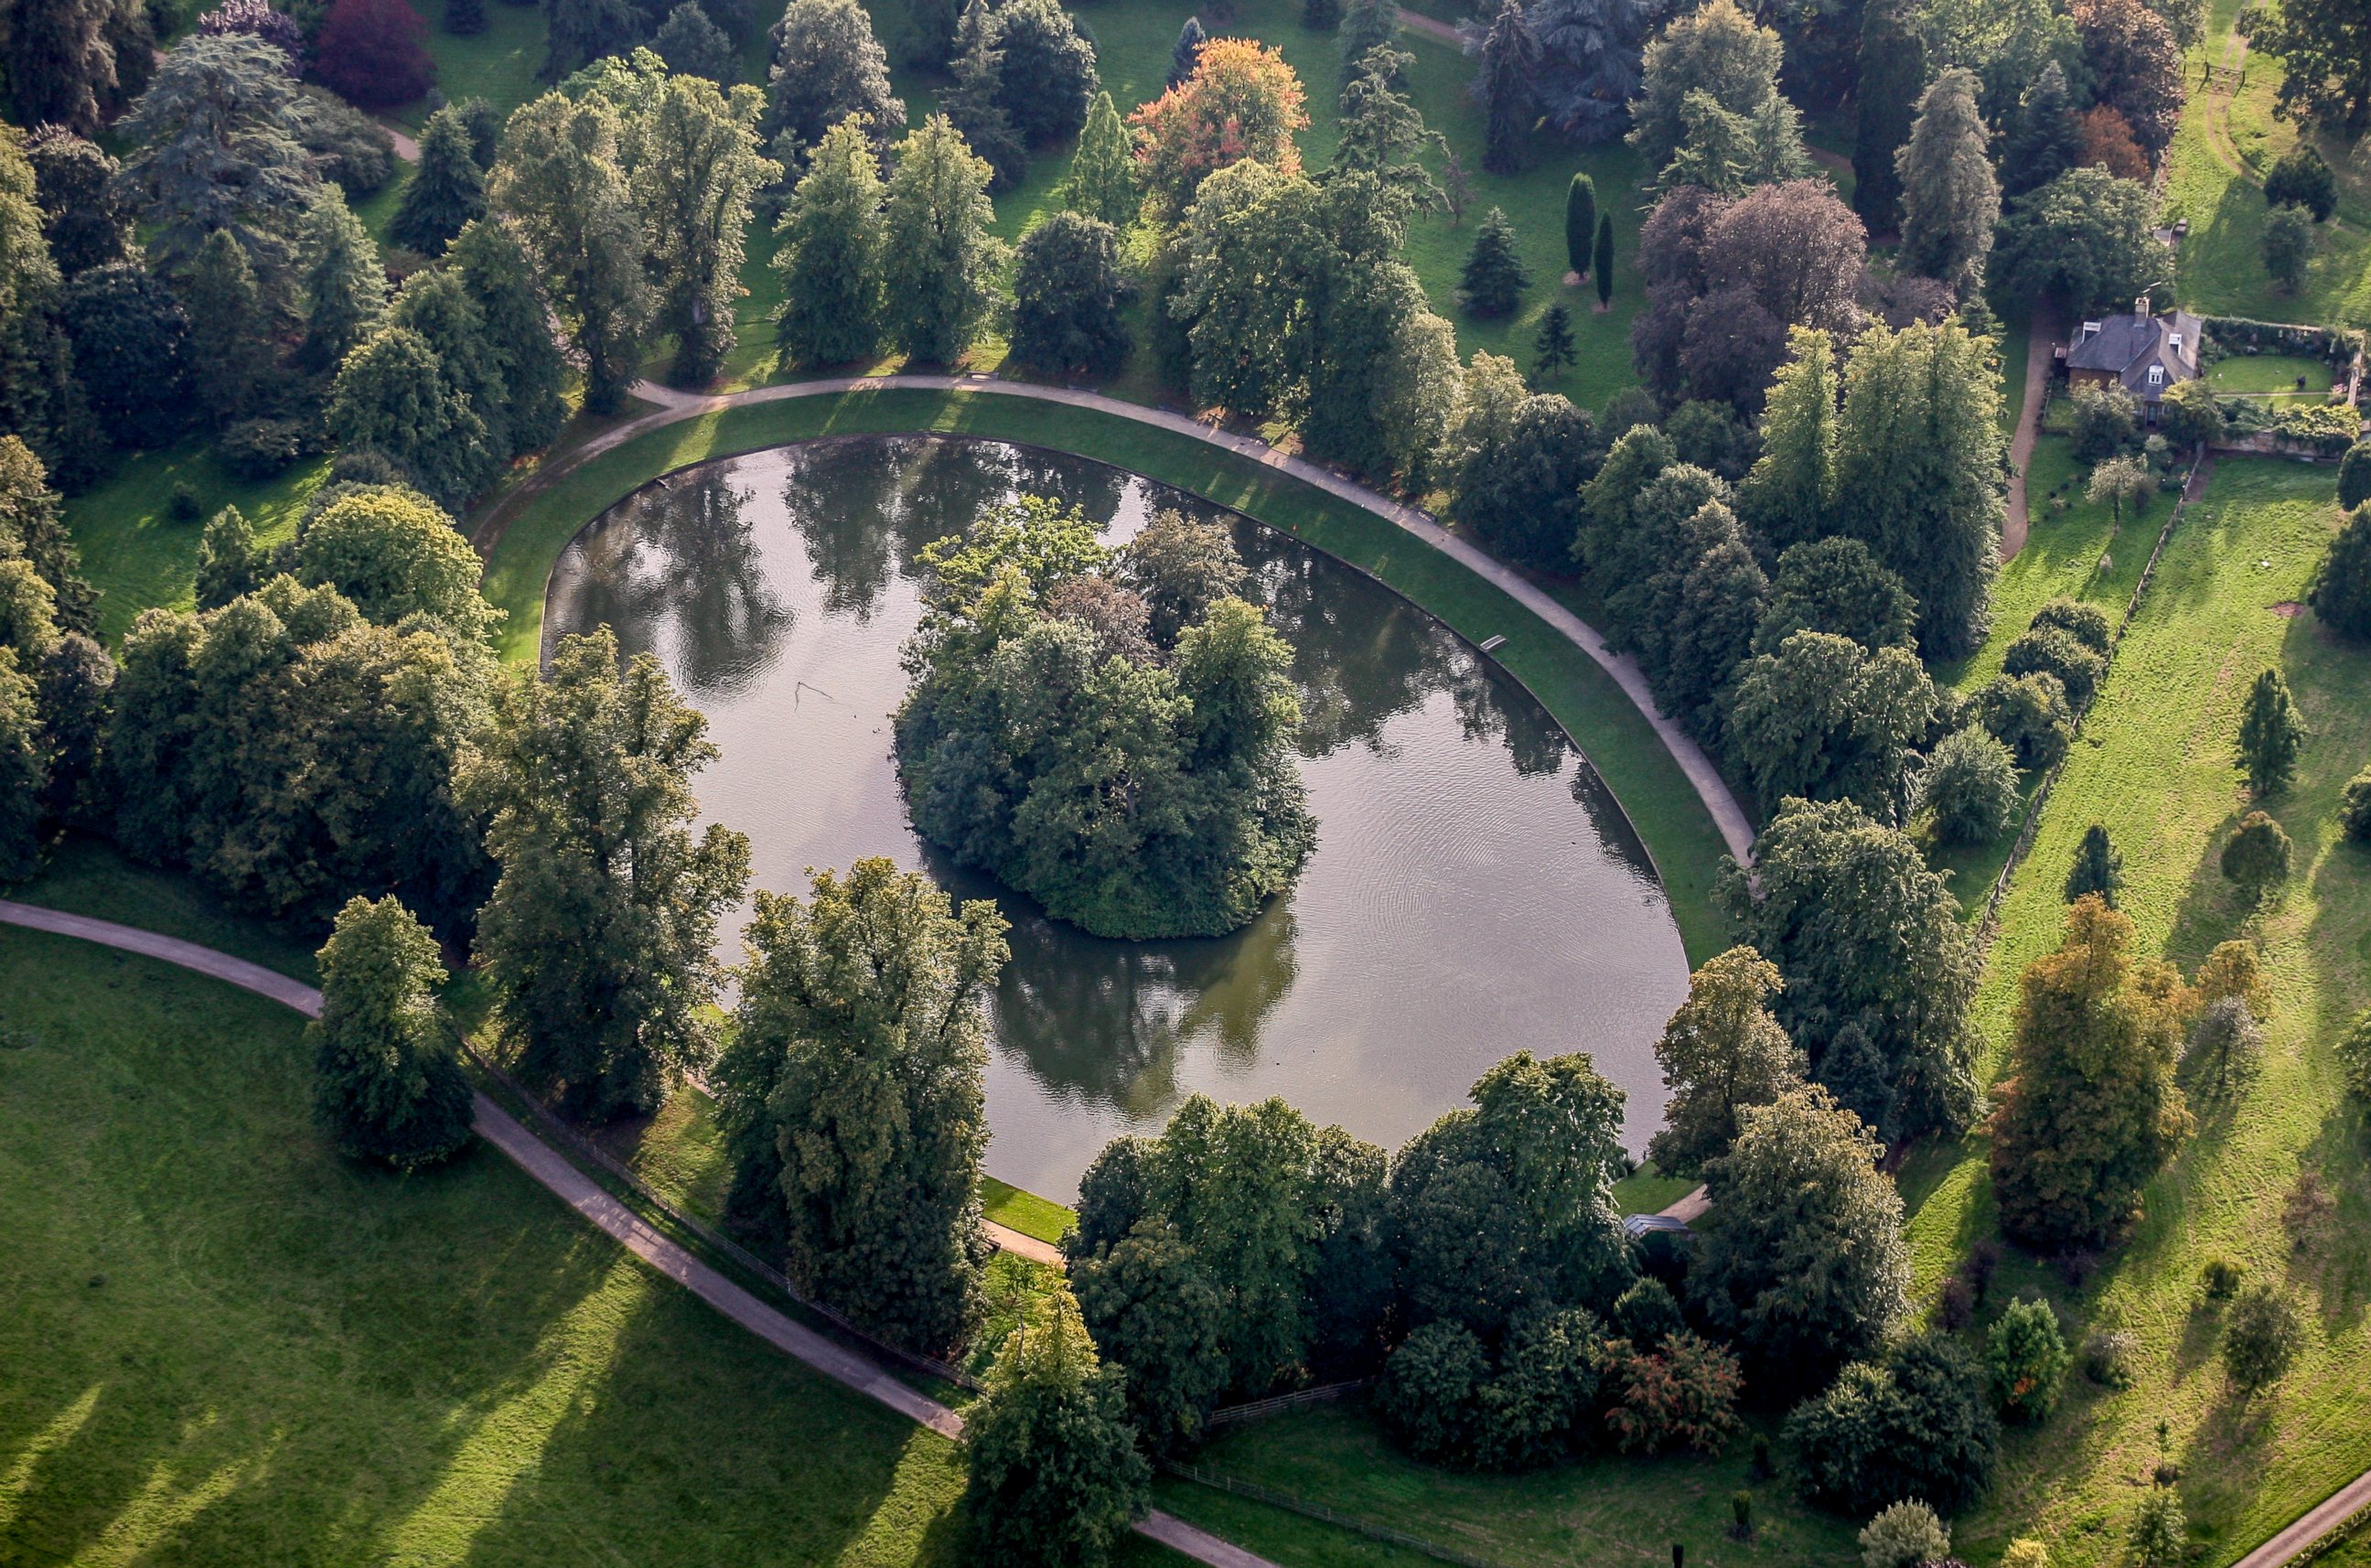 PHOTO: An aerial view of the burial site of Diana, Princess of Wales in this Sept. 9, 2006 file photo. The Round Oval lake is located in the Althorp Estate, home to Spencer family.